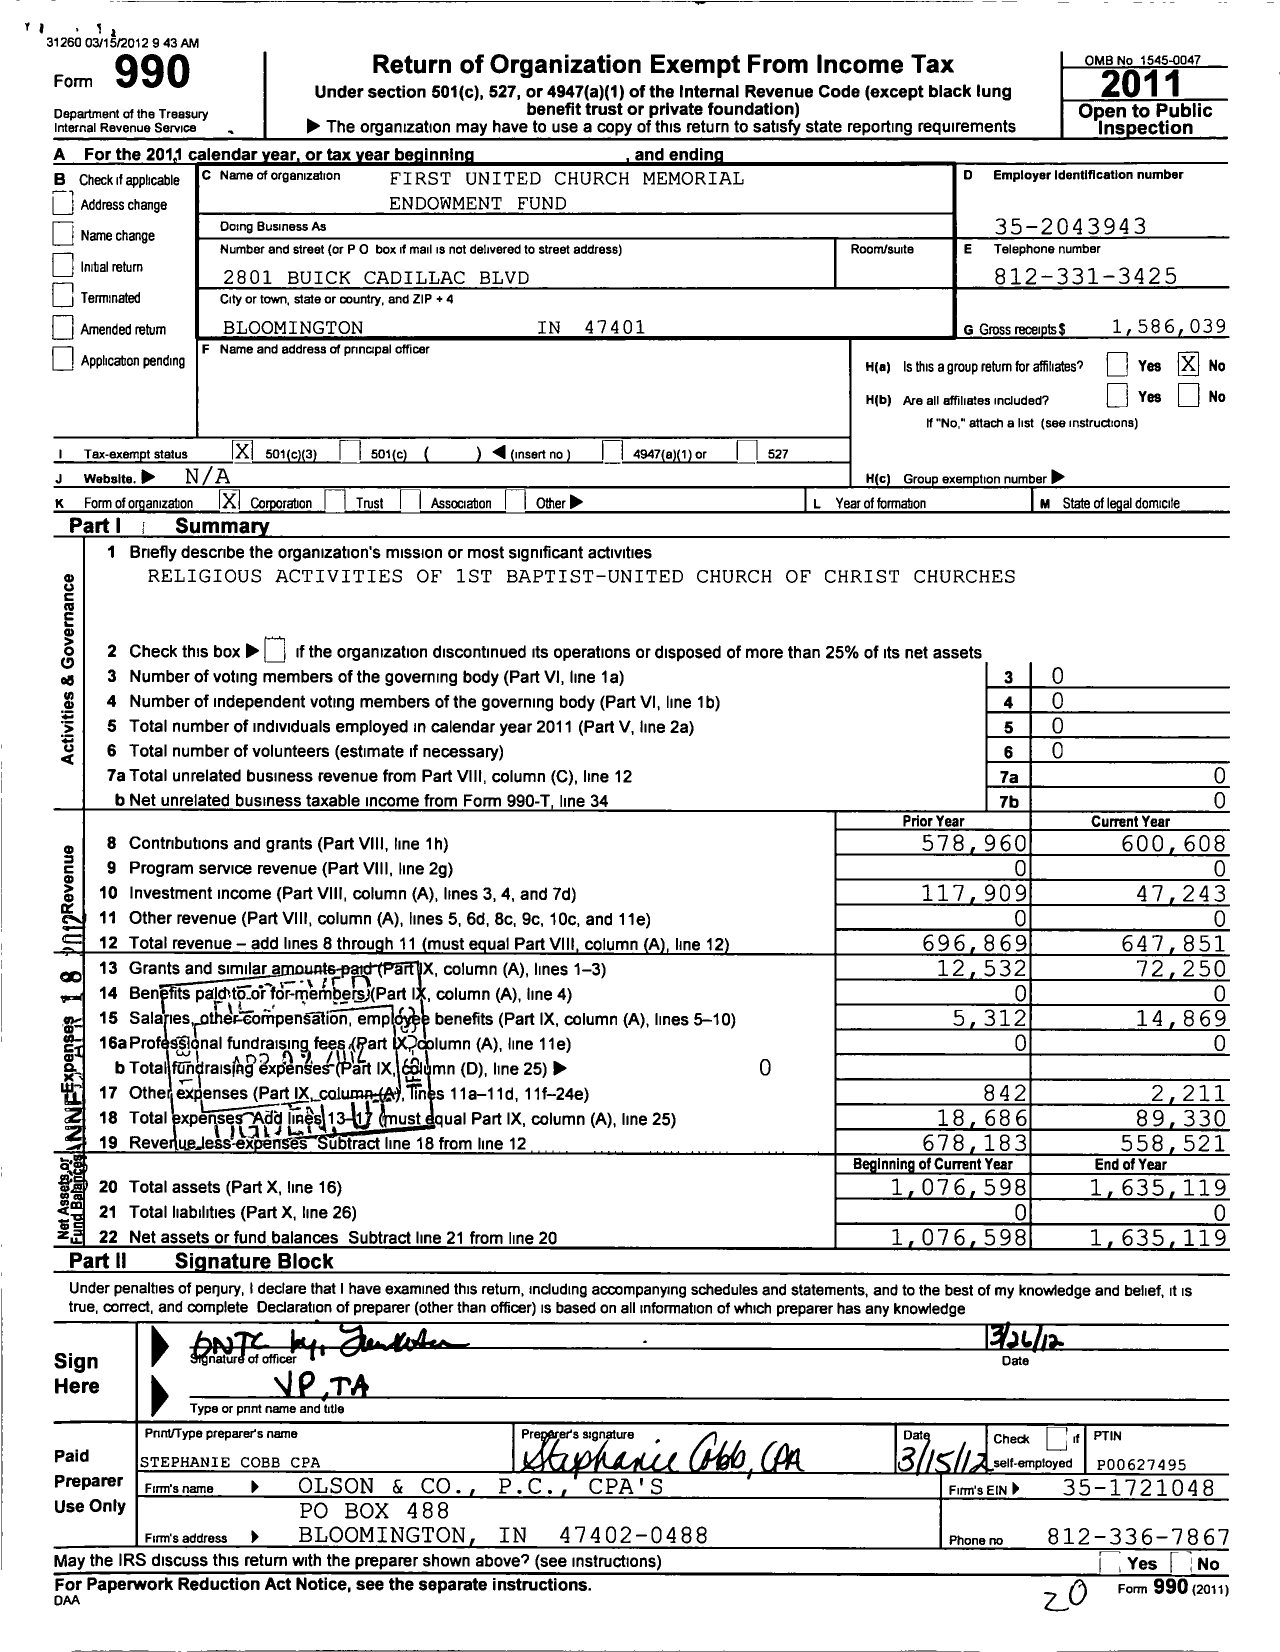 Image of first page of 2011 Form 990 for First United Church Memorial Endowment Fund